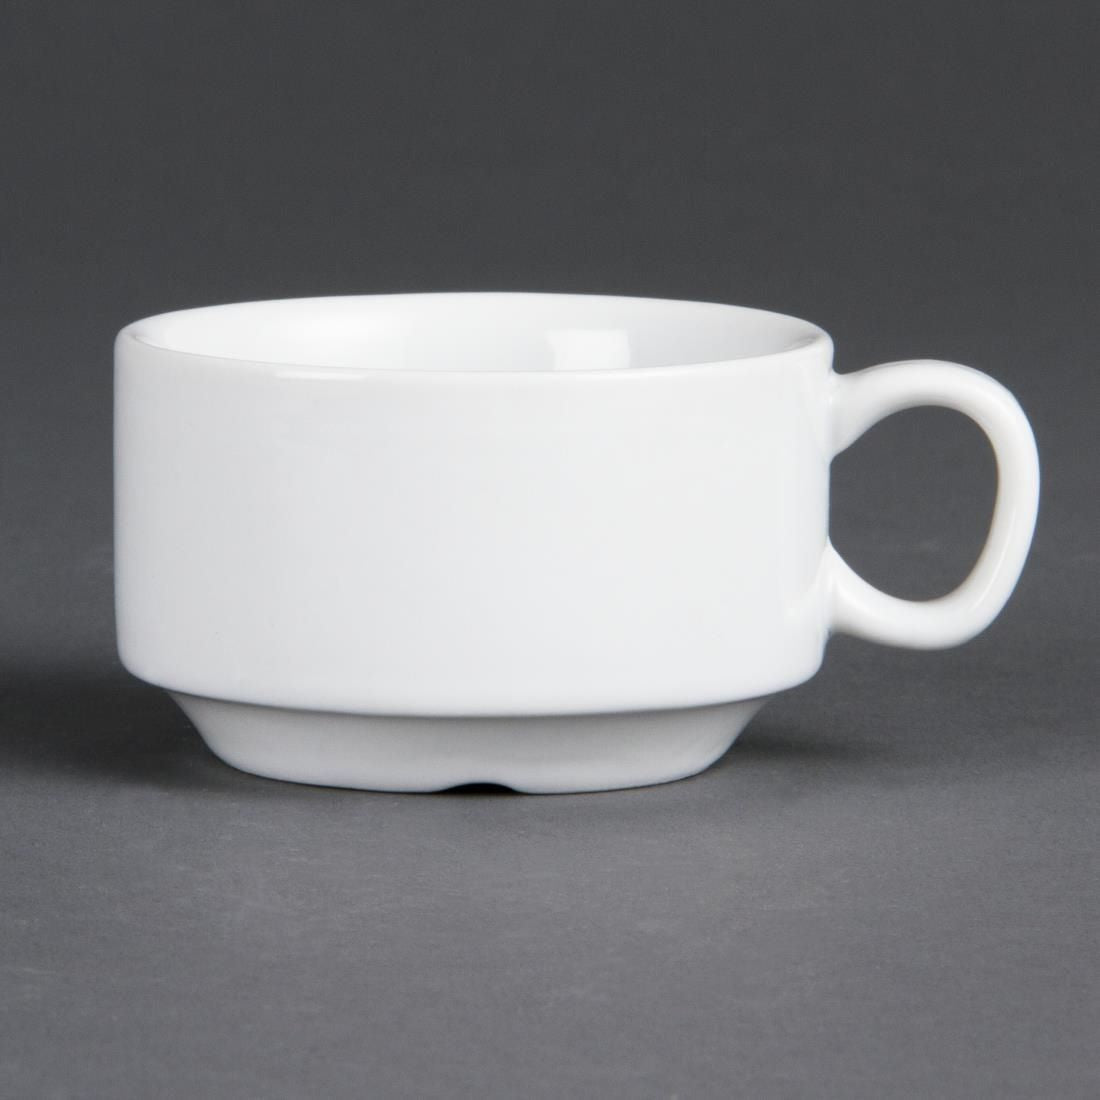 CB471 Olympia Whiteware Stacking Espresso Cups 85ml 3oz (Pack of 12)